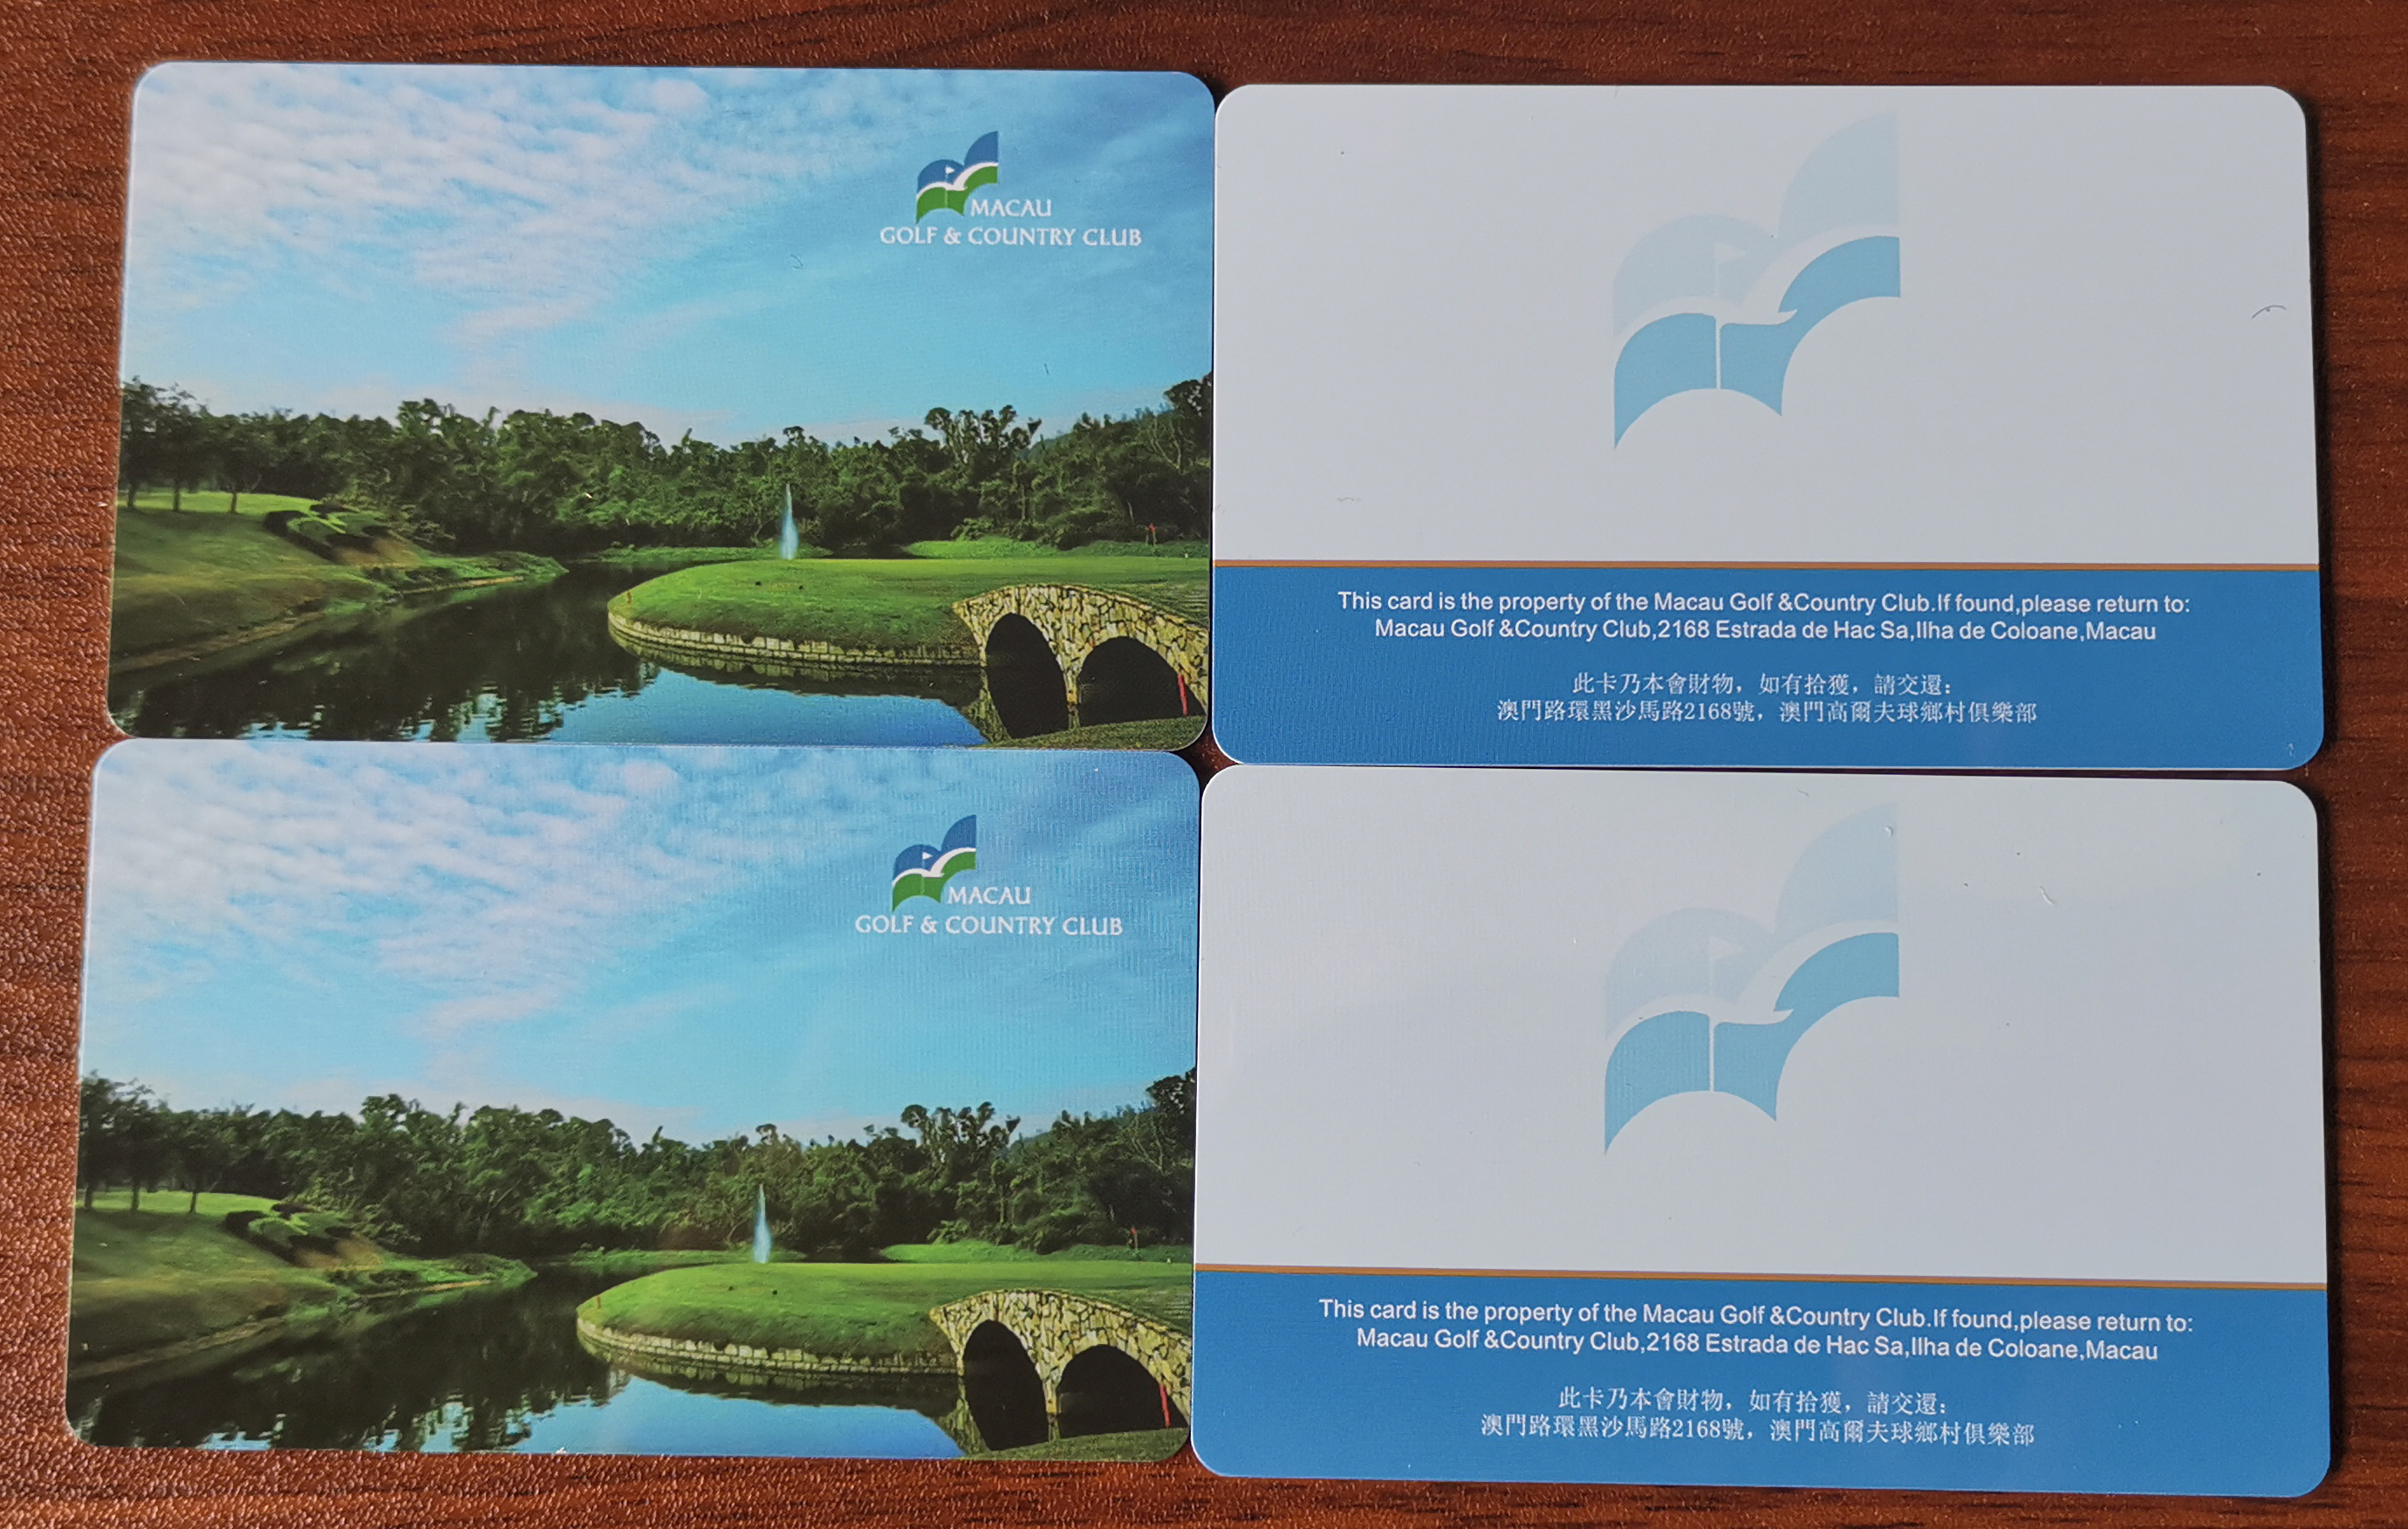 Excelsoo Cases Reference: Macau Golf & Country Club Long Range UHF Parking System Card for VIP User